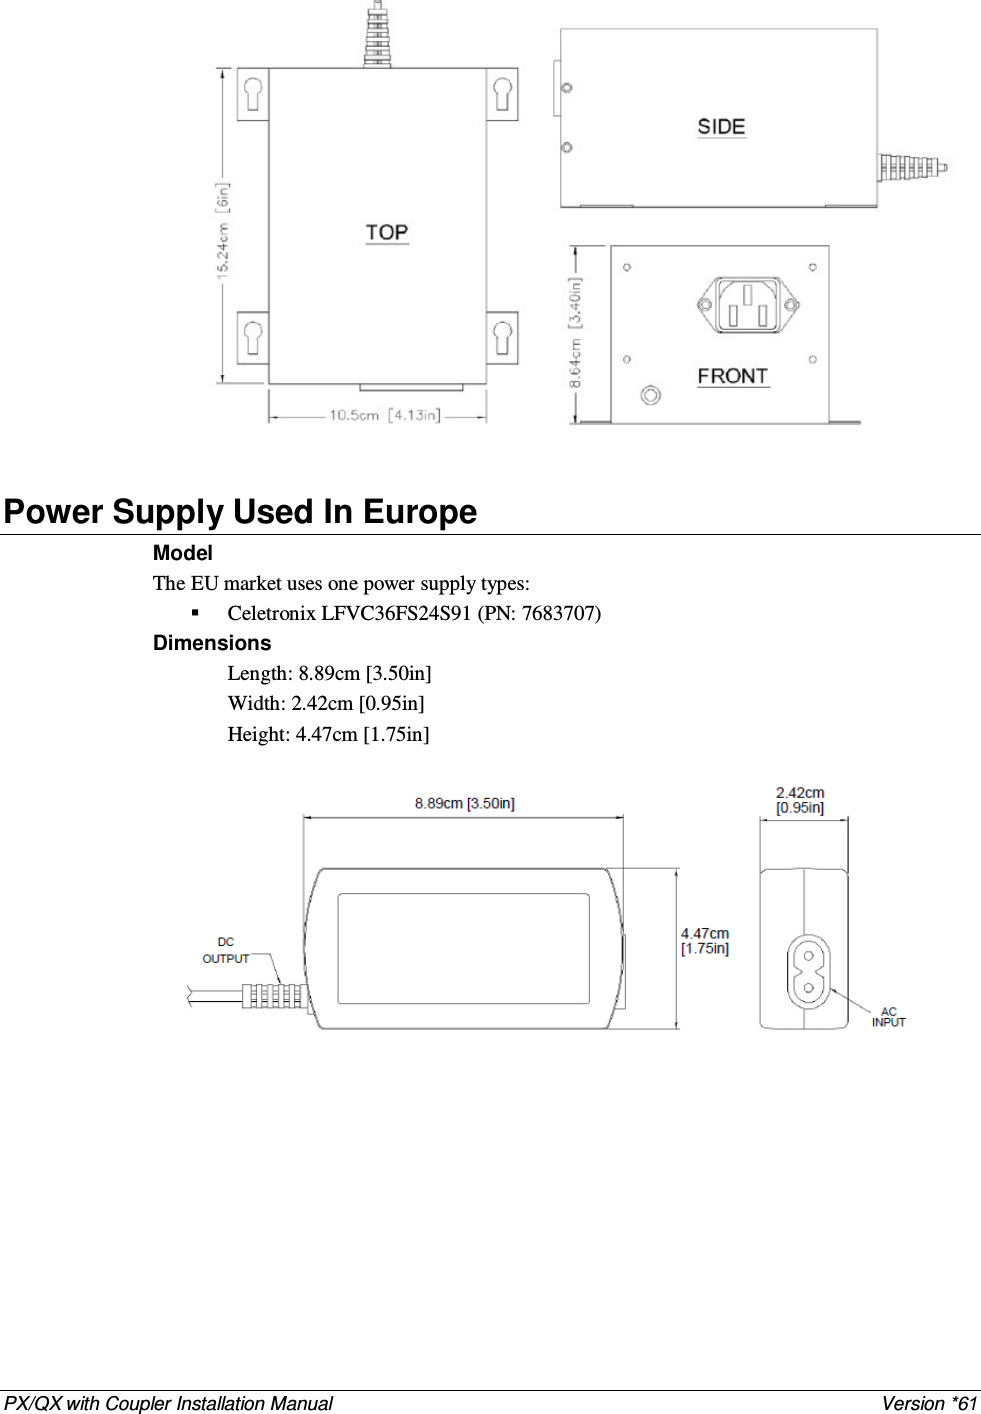 PX/QX with Coupler Installation Manual    Version *61   Power Supply Used In Europe Model The EU market uses one power supply types:  Celetronix LFVC36FS24S91 (PN: 7683707) Dimensions Length: 8.89cm [3.50in]  Width: 2.42cm [0.95in]  Height: 4.47cm [1.75in]     